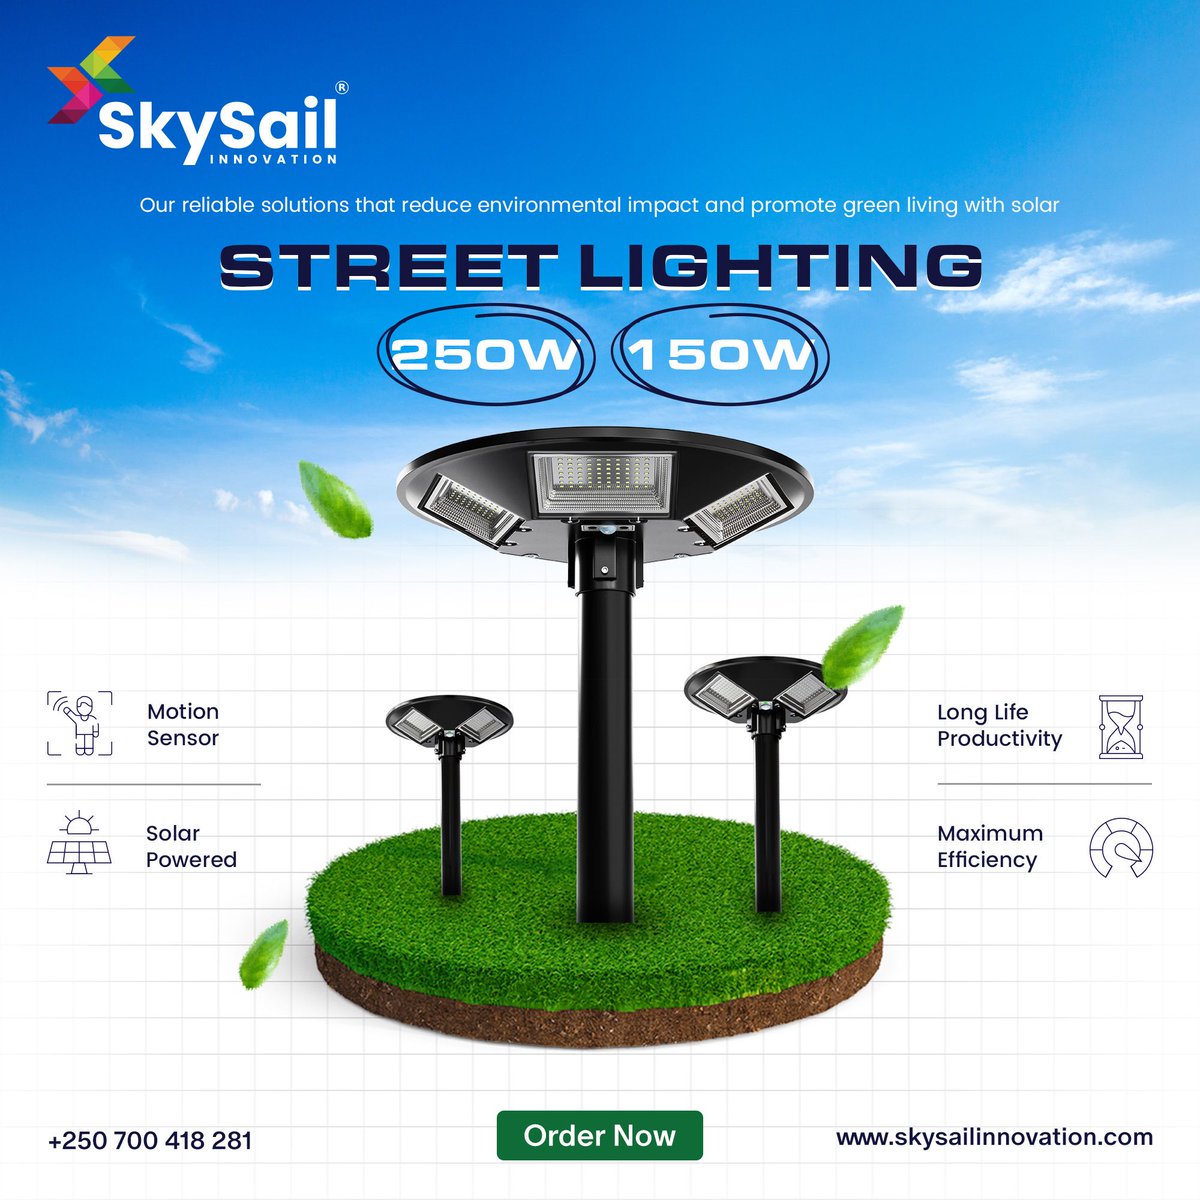 🌟 Illuminate the way forward with SkySail Innovation! 🌿 Our eco-friendly 250W and 150W solar street lighting solutions are paving the path towards a greener tomorrow. Join us in our mission to reduce environmental impact while brightening communities. 💡 #SkySailInnovation